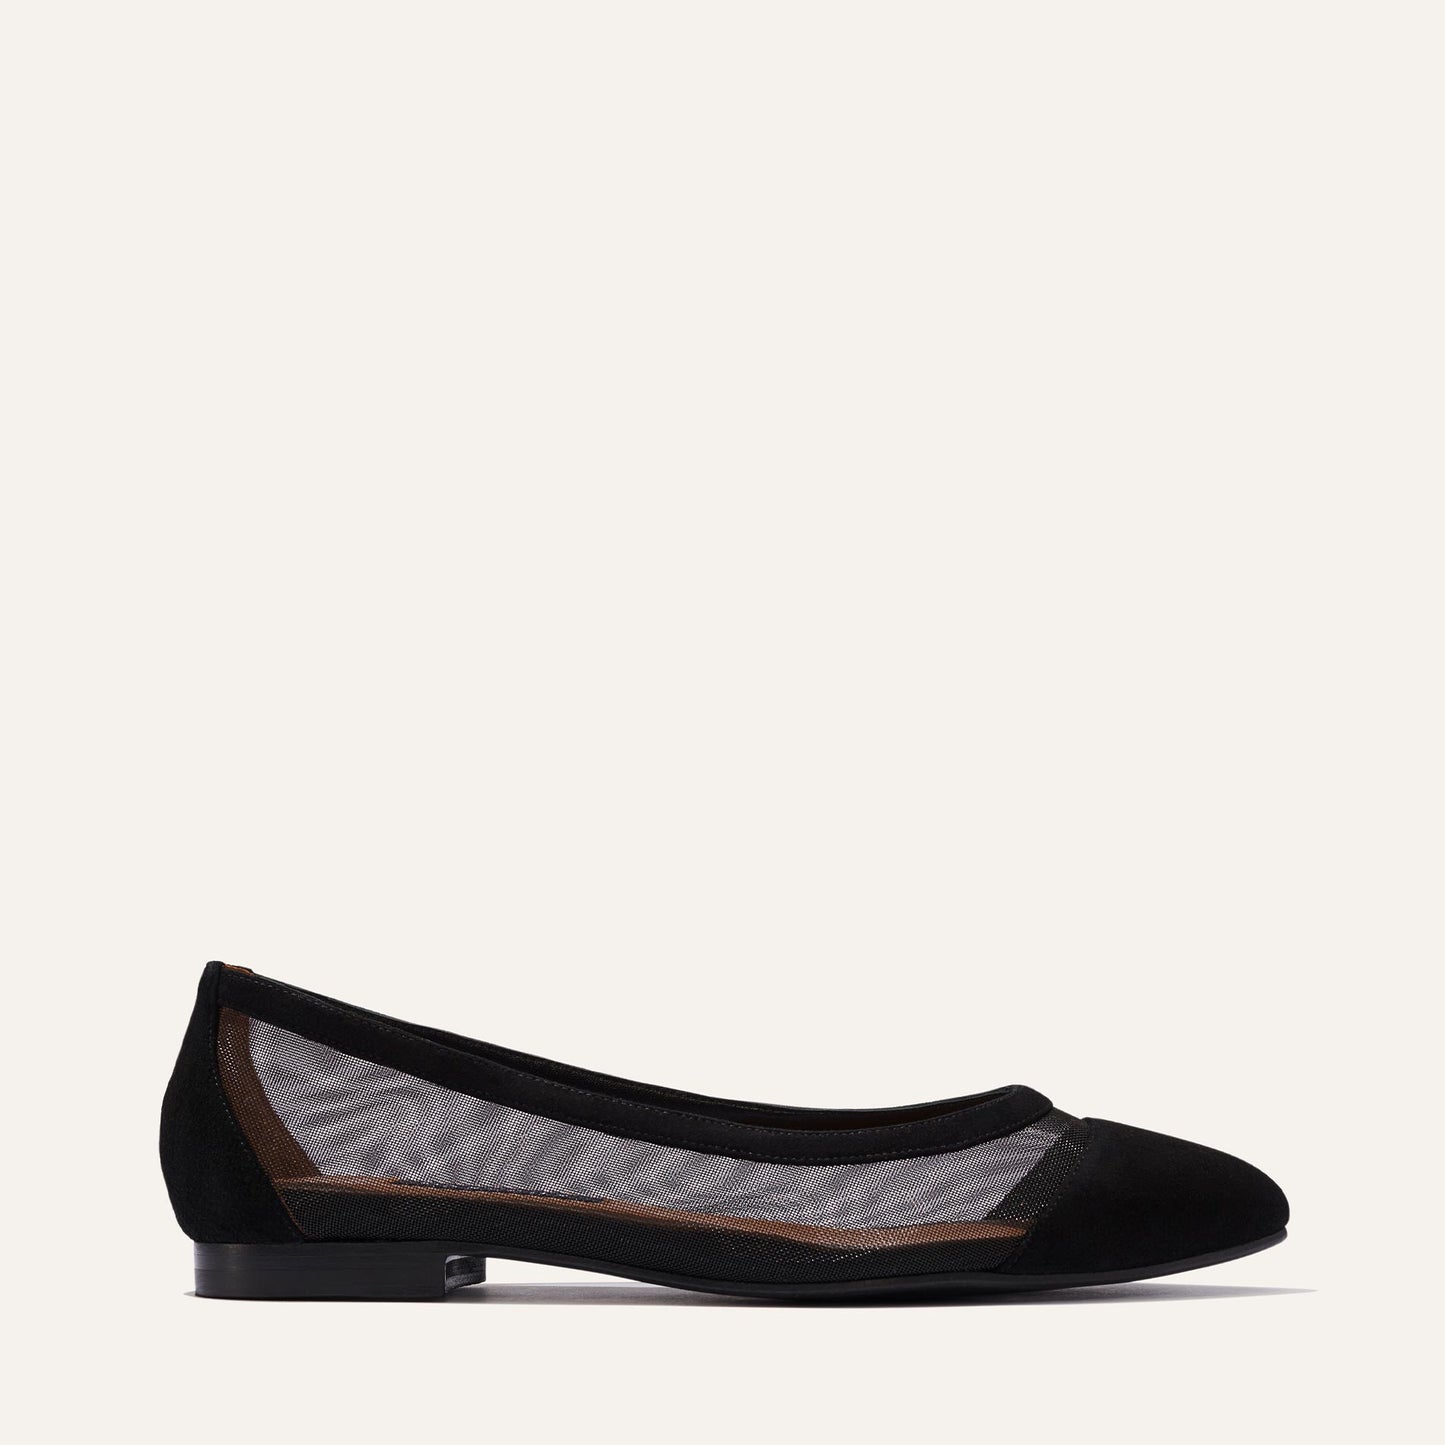 Margaux's classic and comfortable Pointe ballet flat in black suede and mesh with an elegant pointed toe